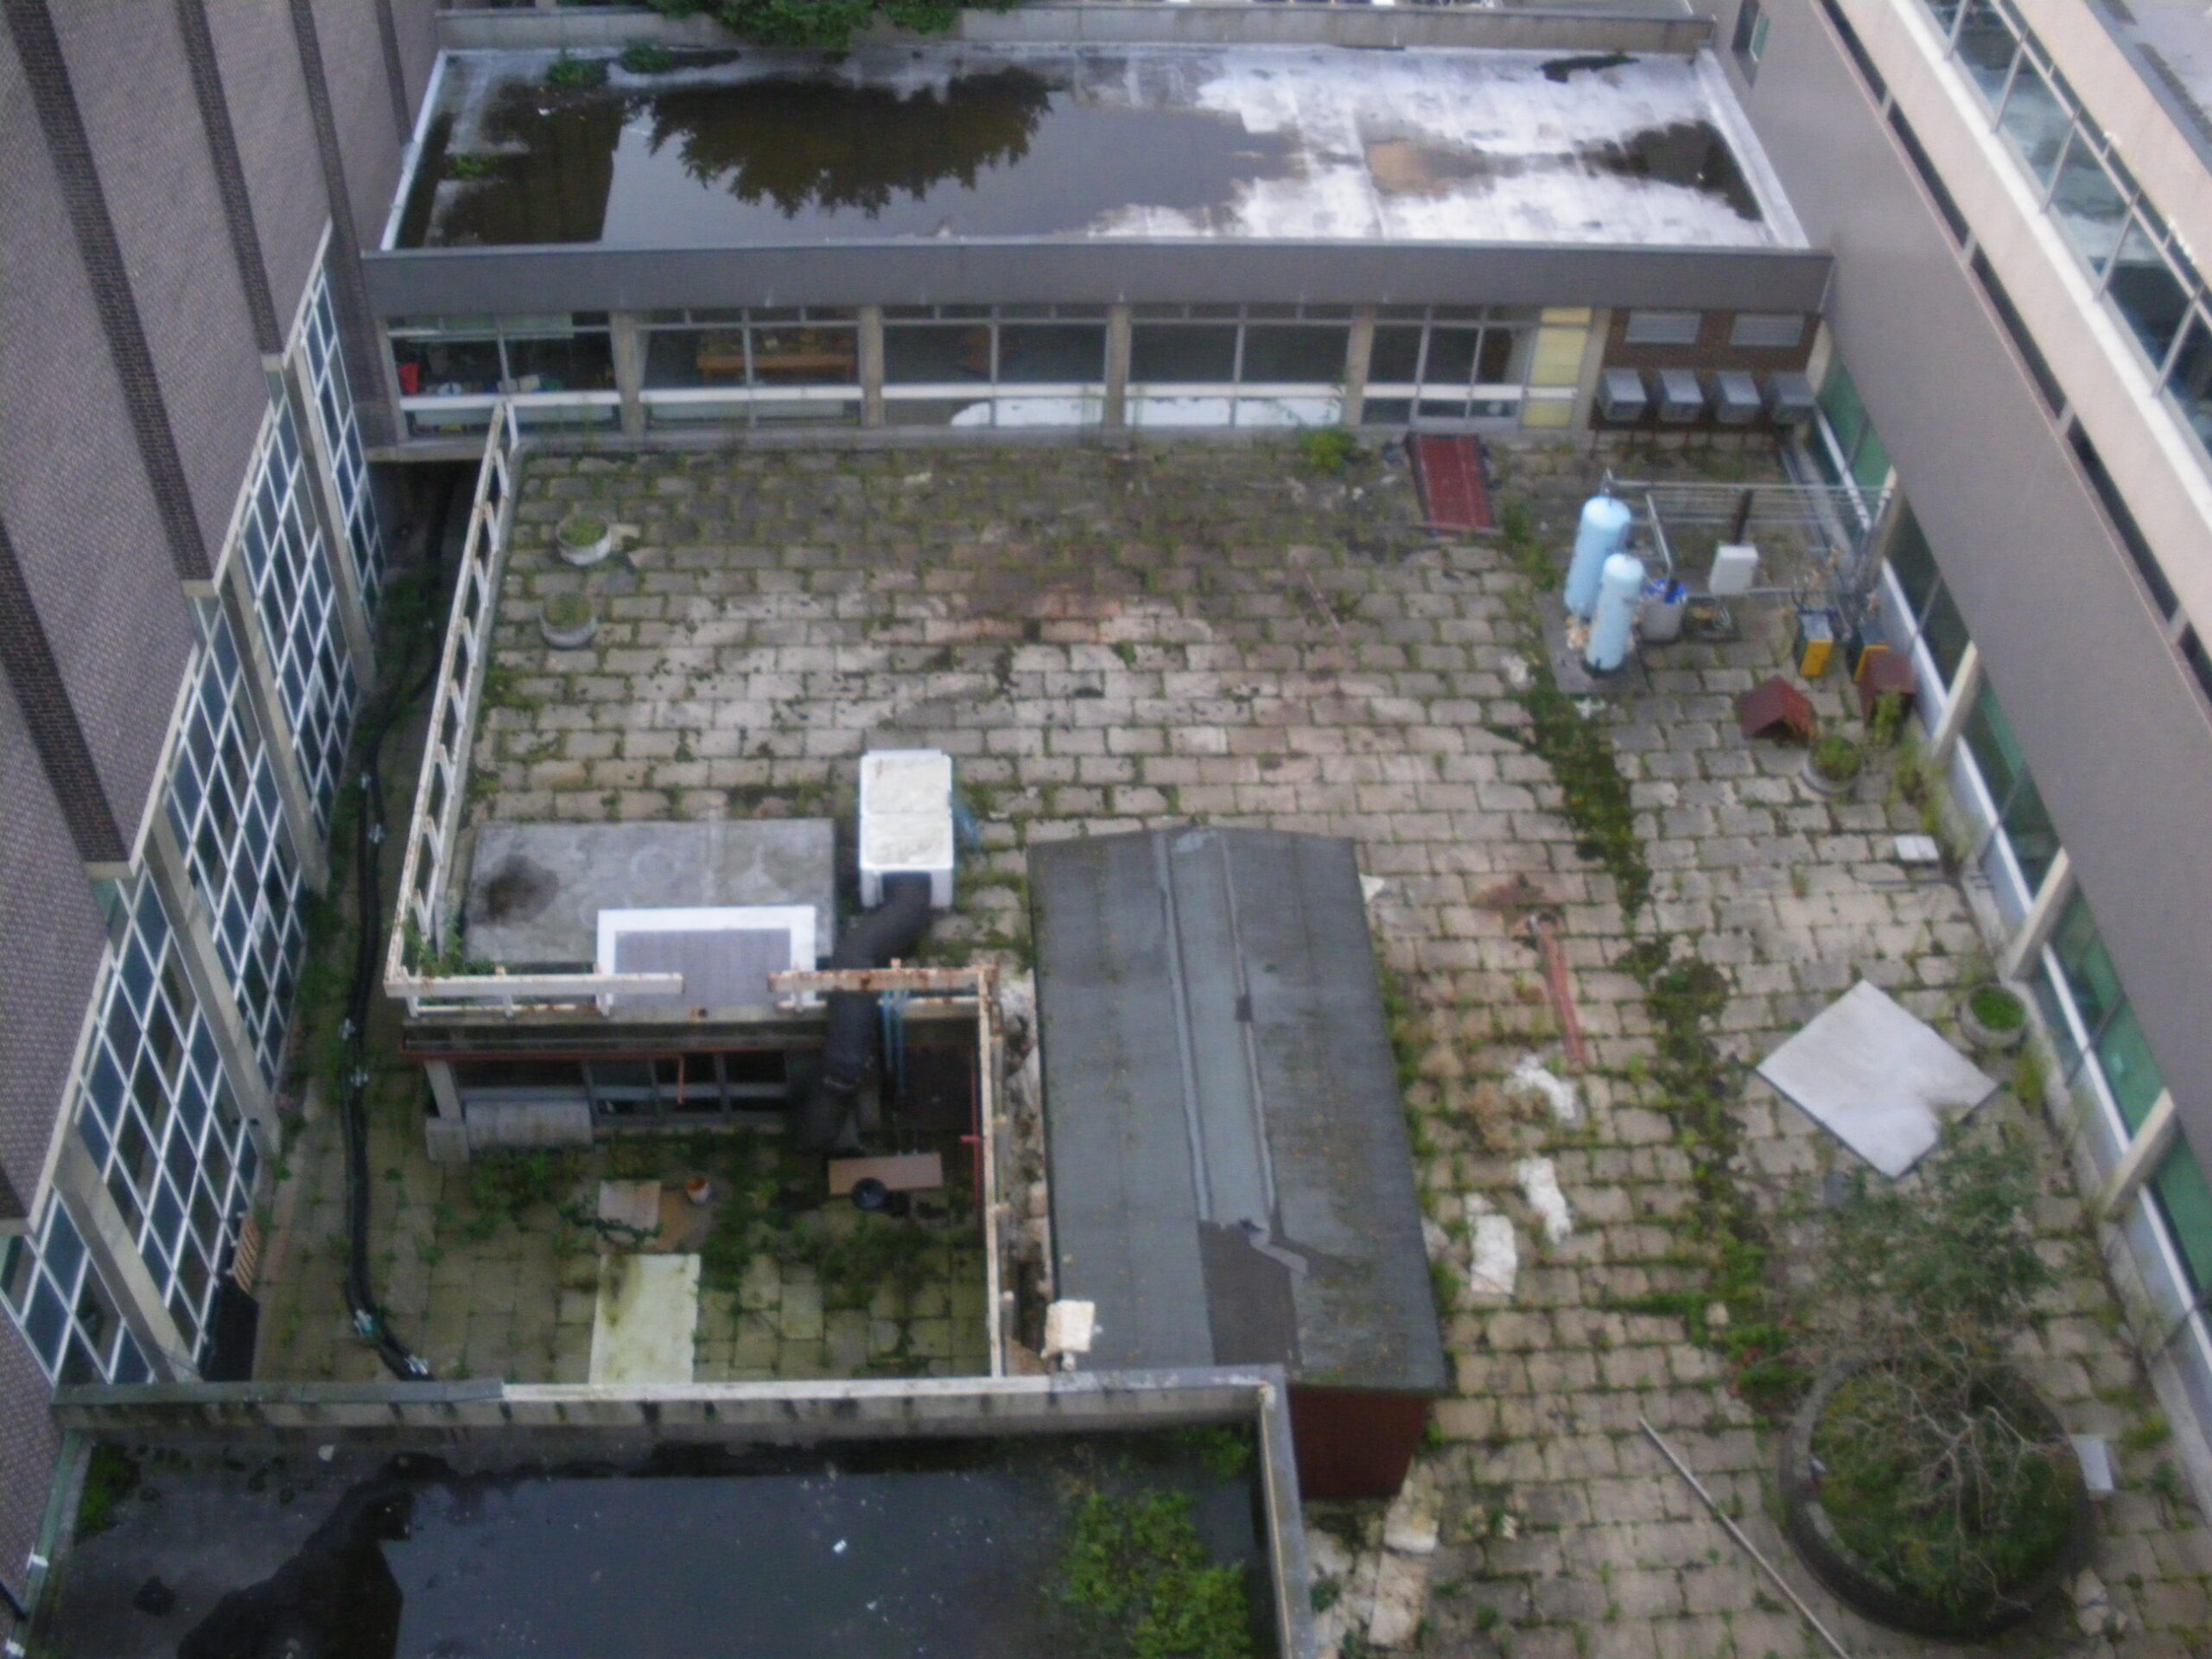 Facing Boiler House courtyard from F core penthouse roof, 13 Sep 2011